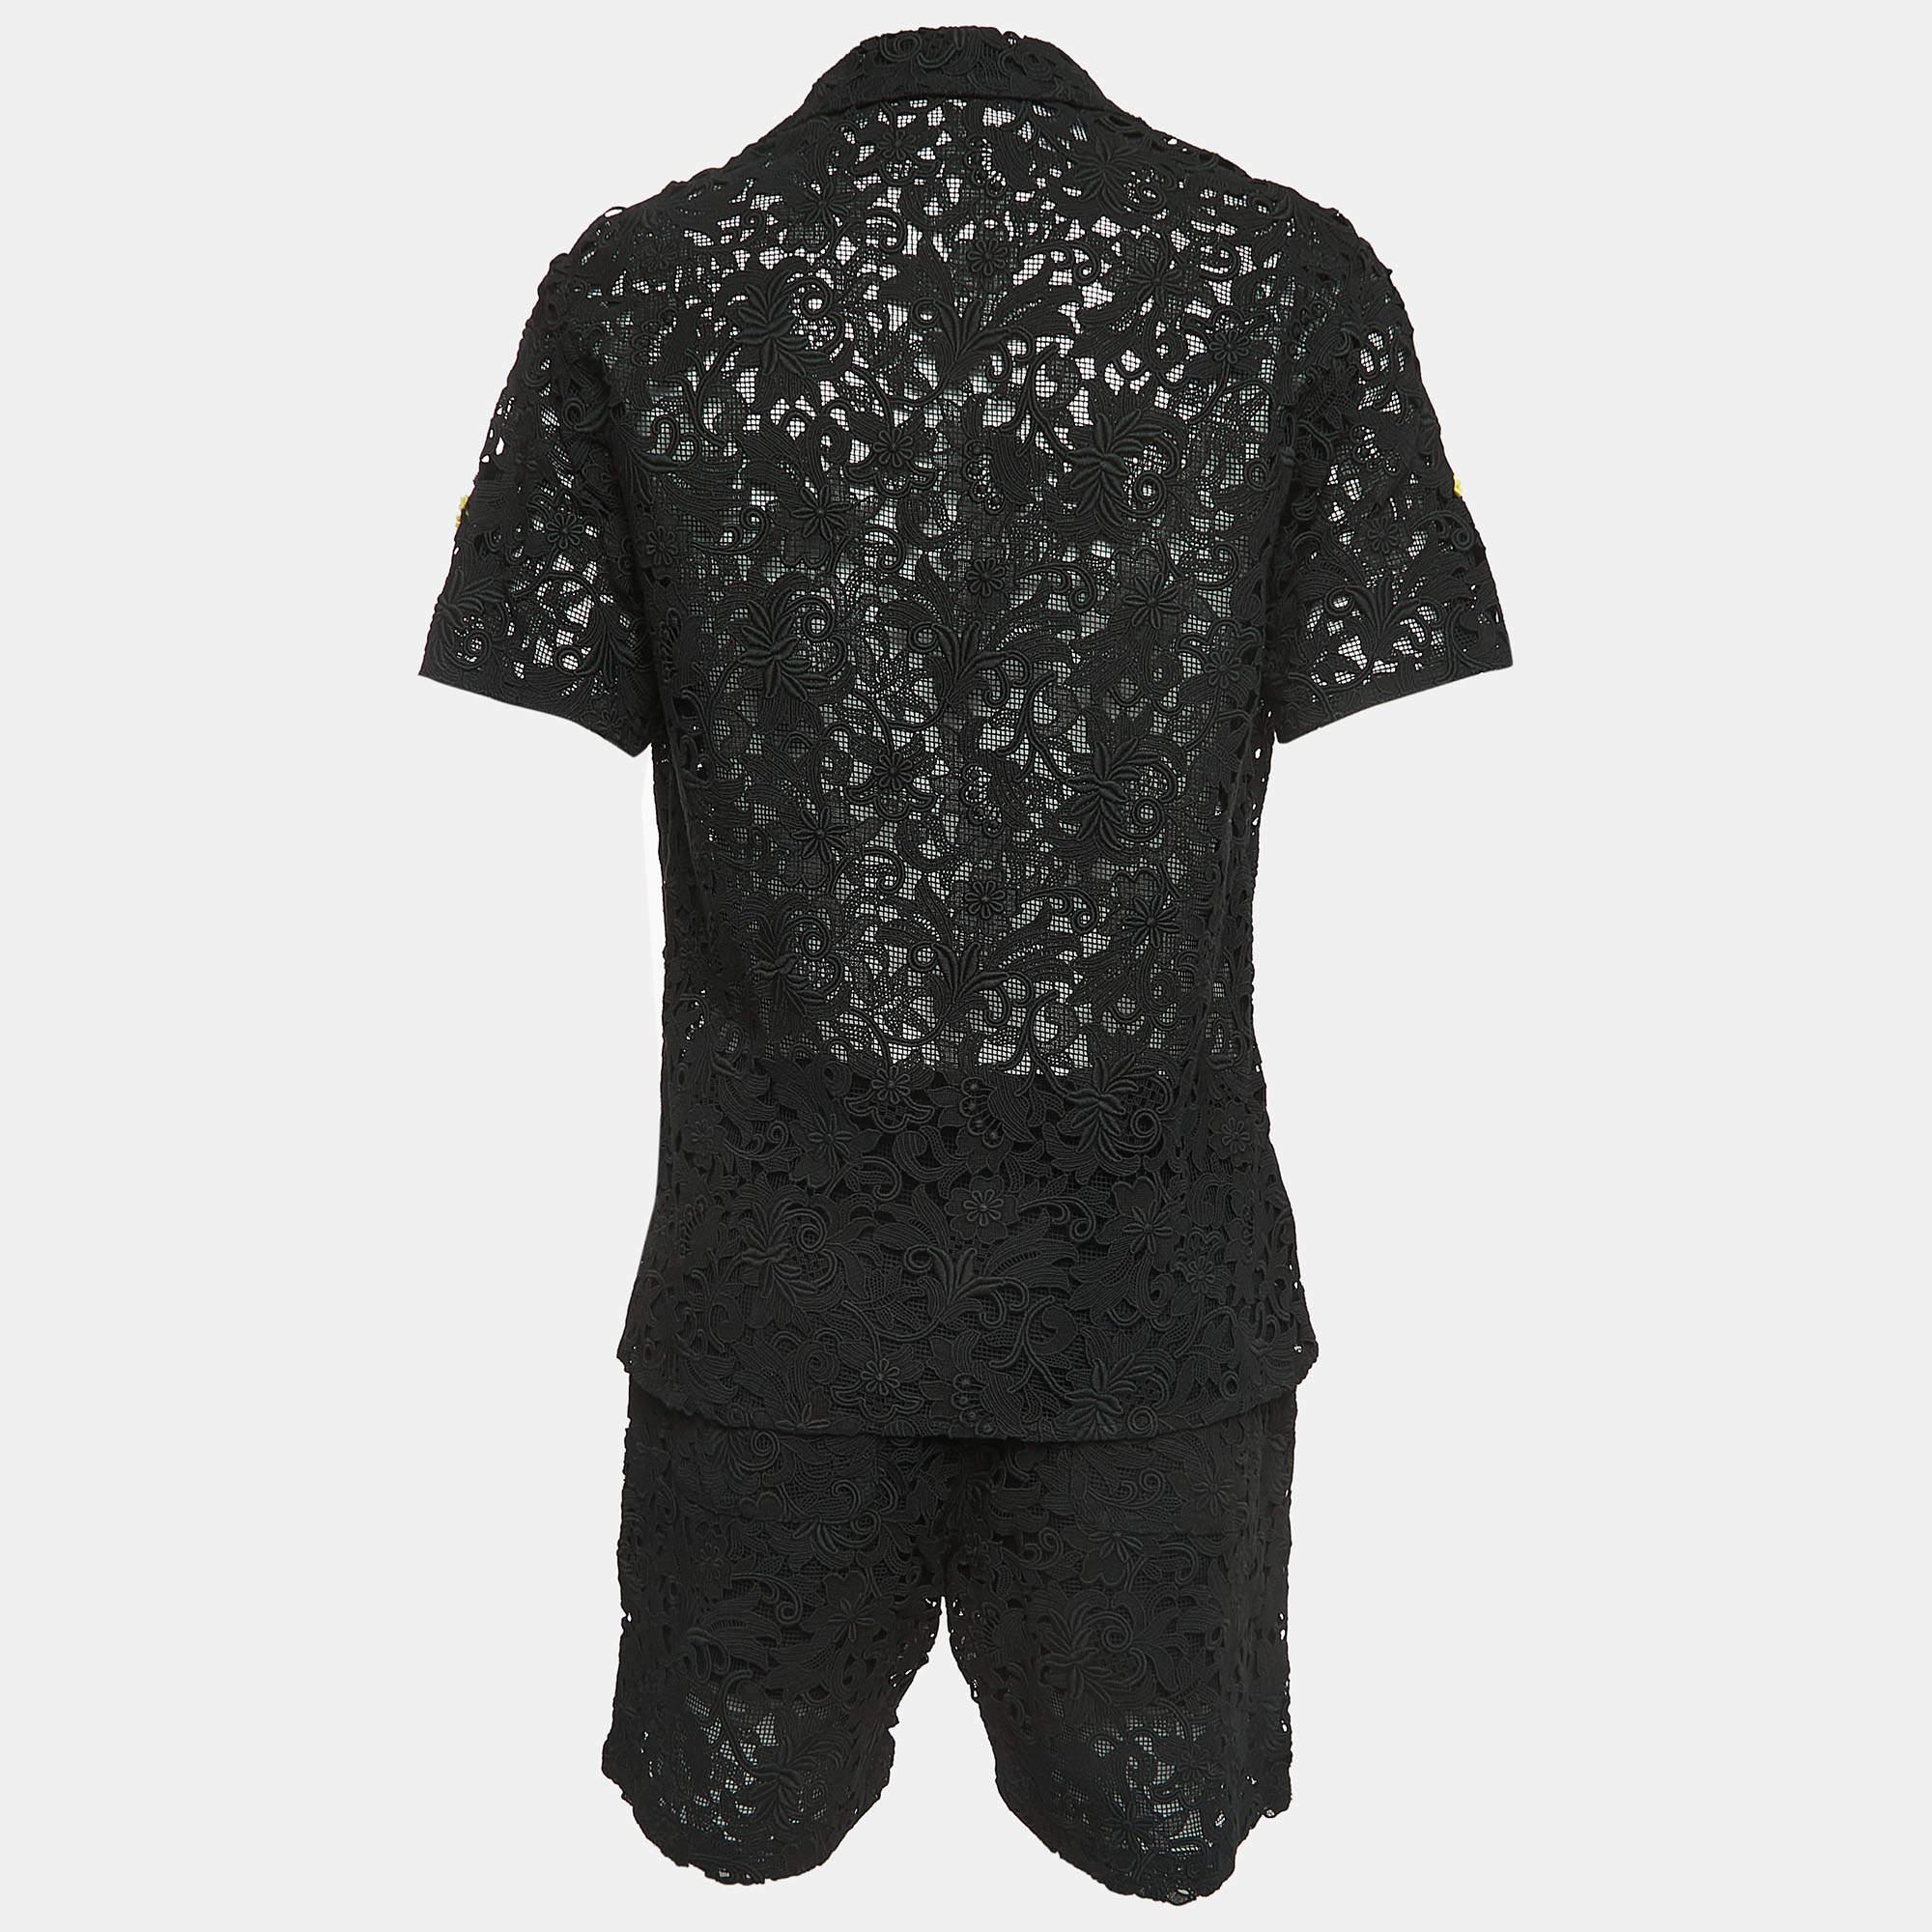 Valentino brings you just the perfect addition you need this season in the form of this shirt set. The set has a floral lace shirt and shorts.

